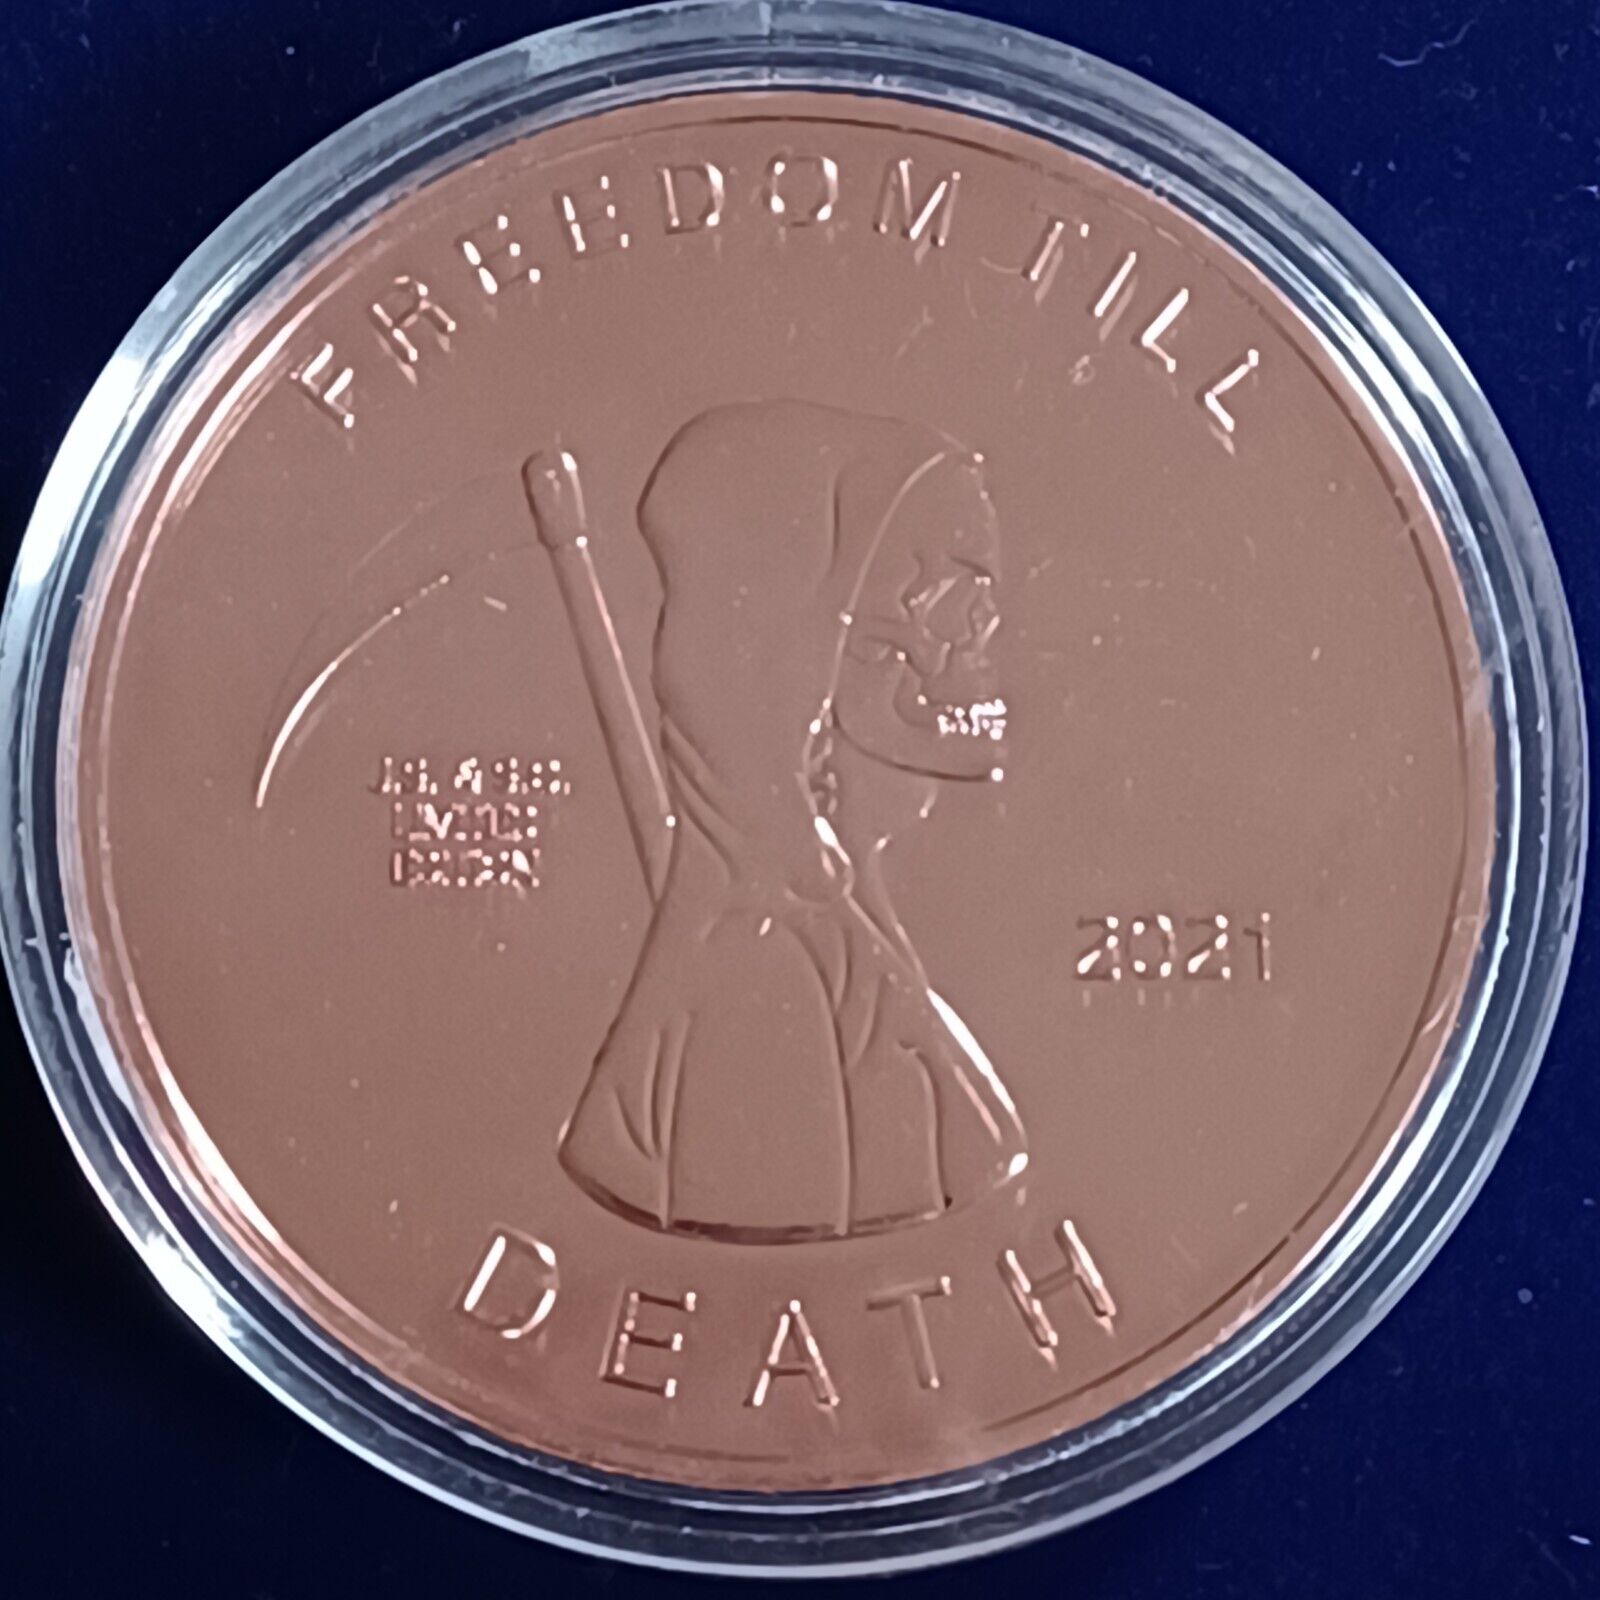 Rare Freedom Till Death 2021 Challenge Coin J.S. & S.O. Limited Edition Medal